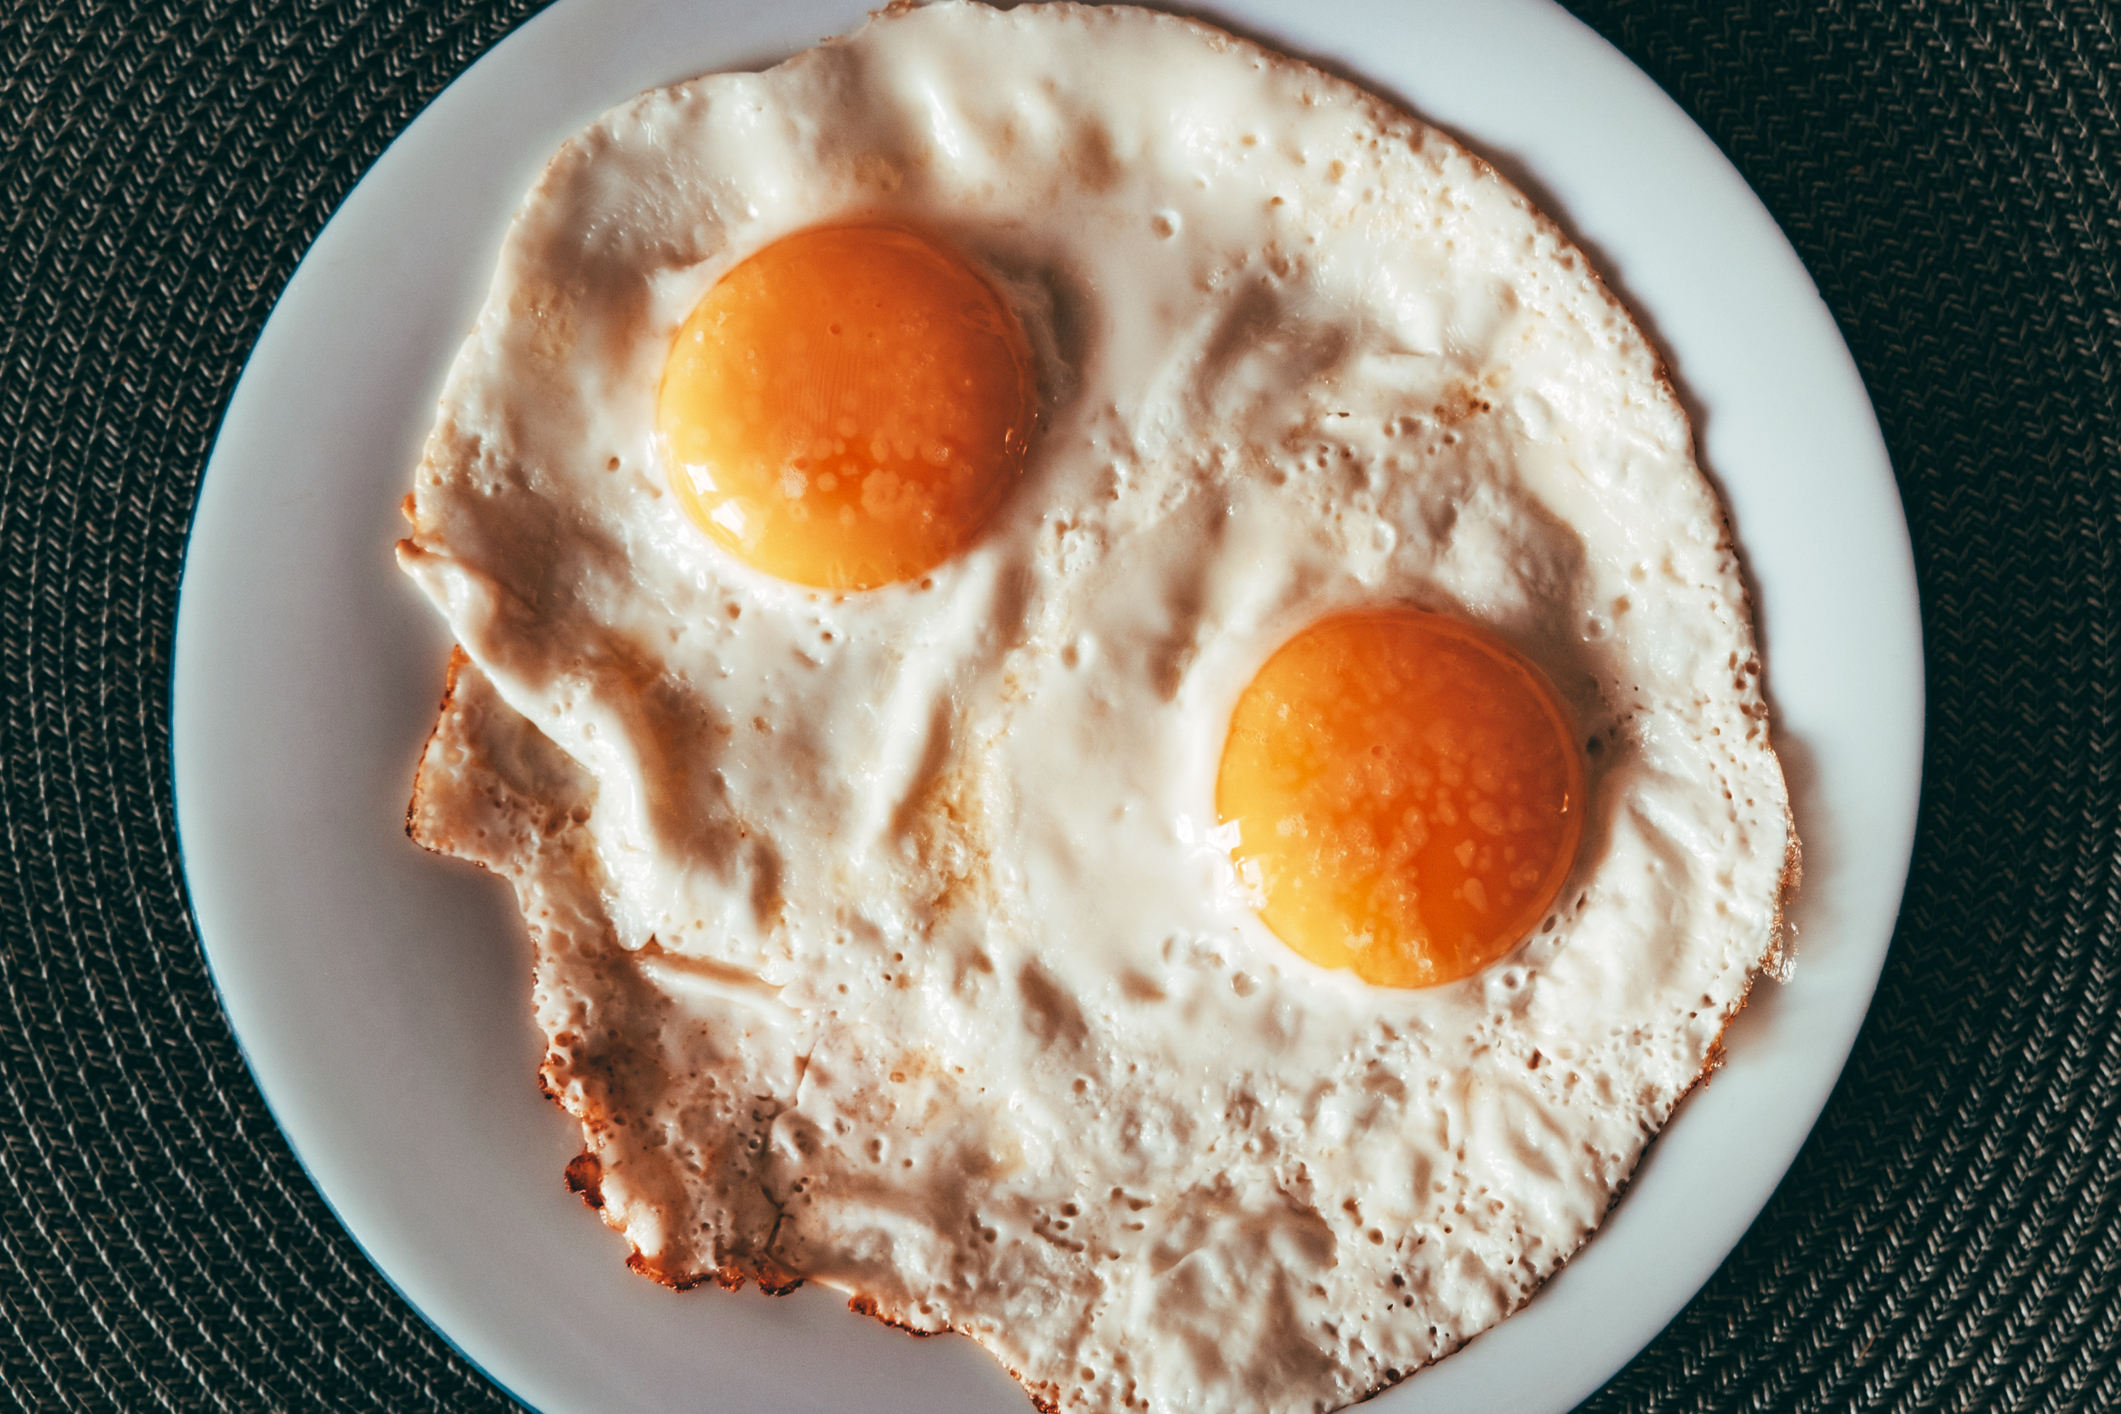 Two sunny-side up eggs on a plate